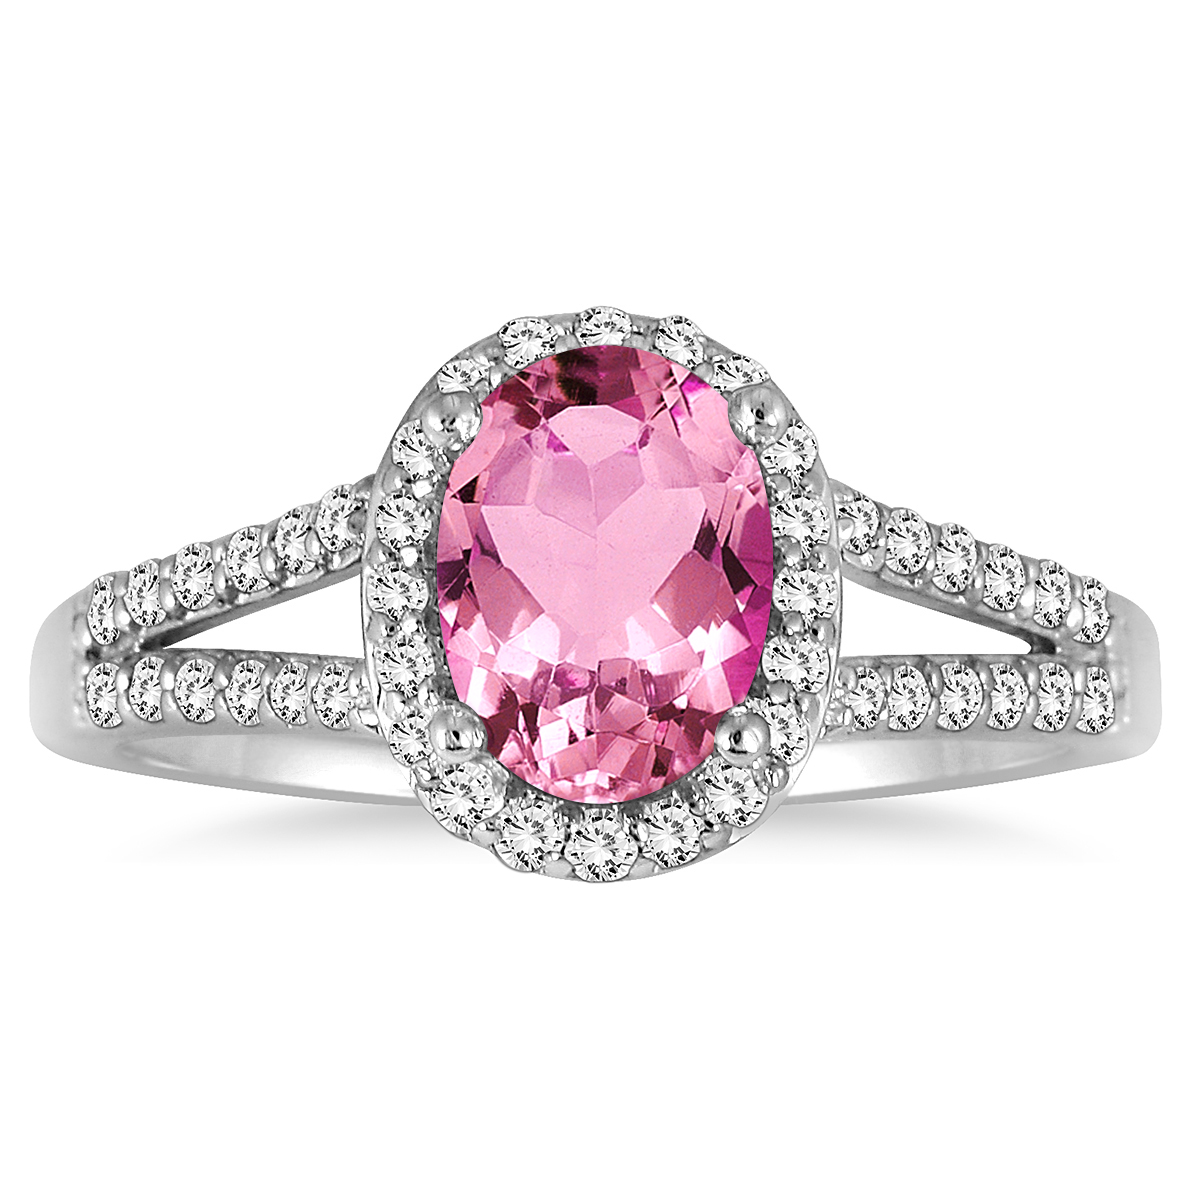 1 1/4 Carat Oval Pink Topaz and Diamond Ring in 10K White Gold